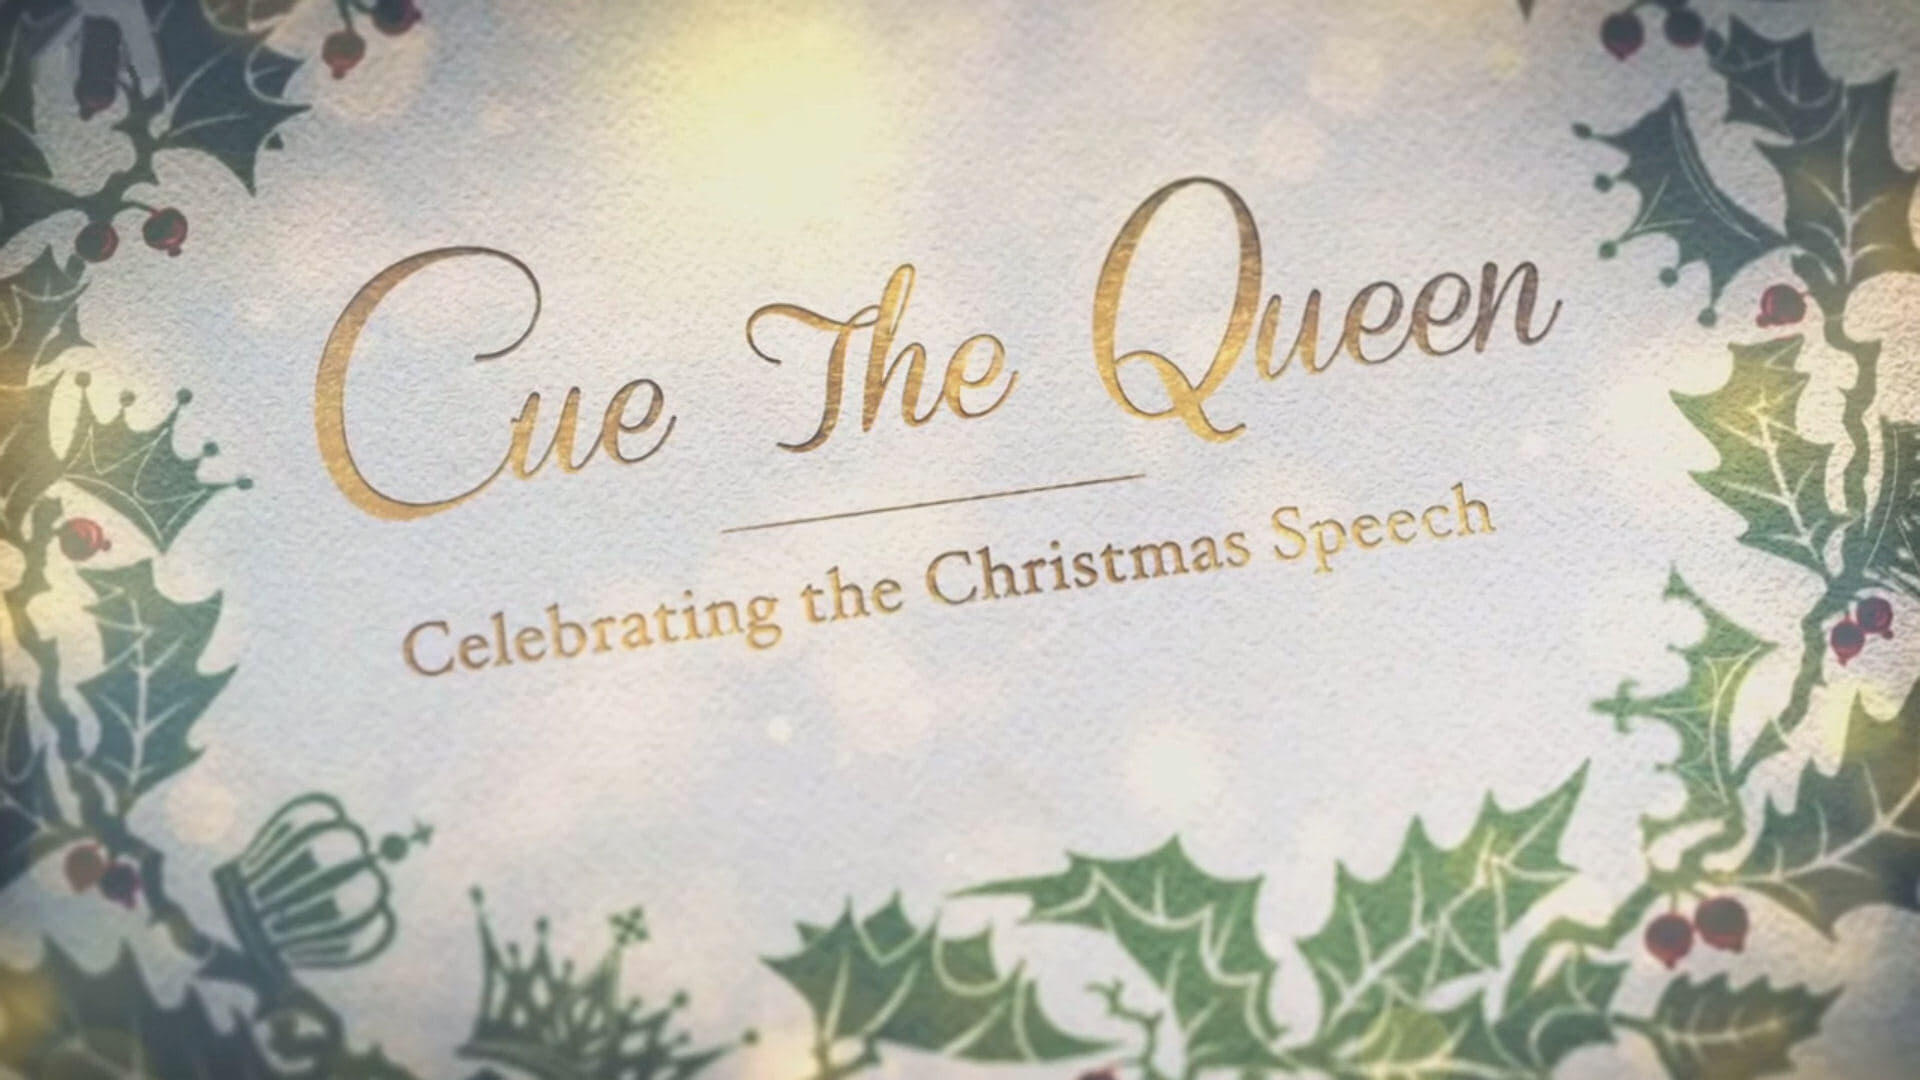 Cue the Queen: Celebrating the Christmas Speech